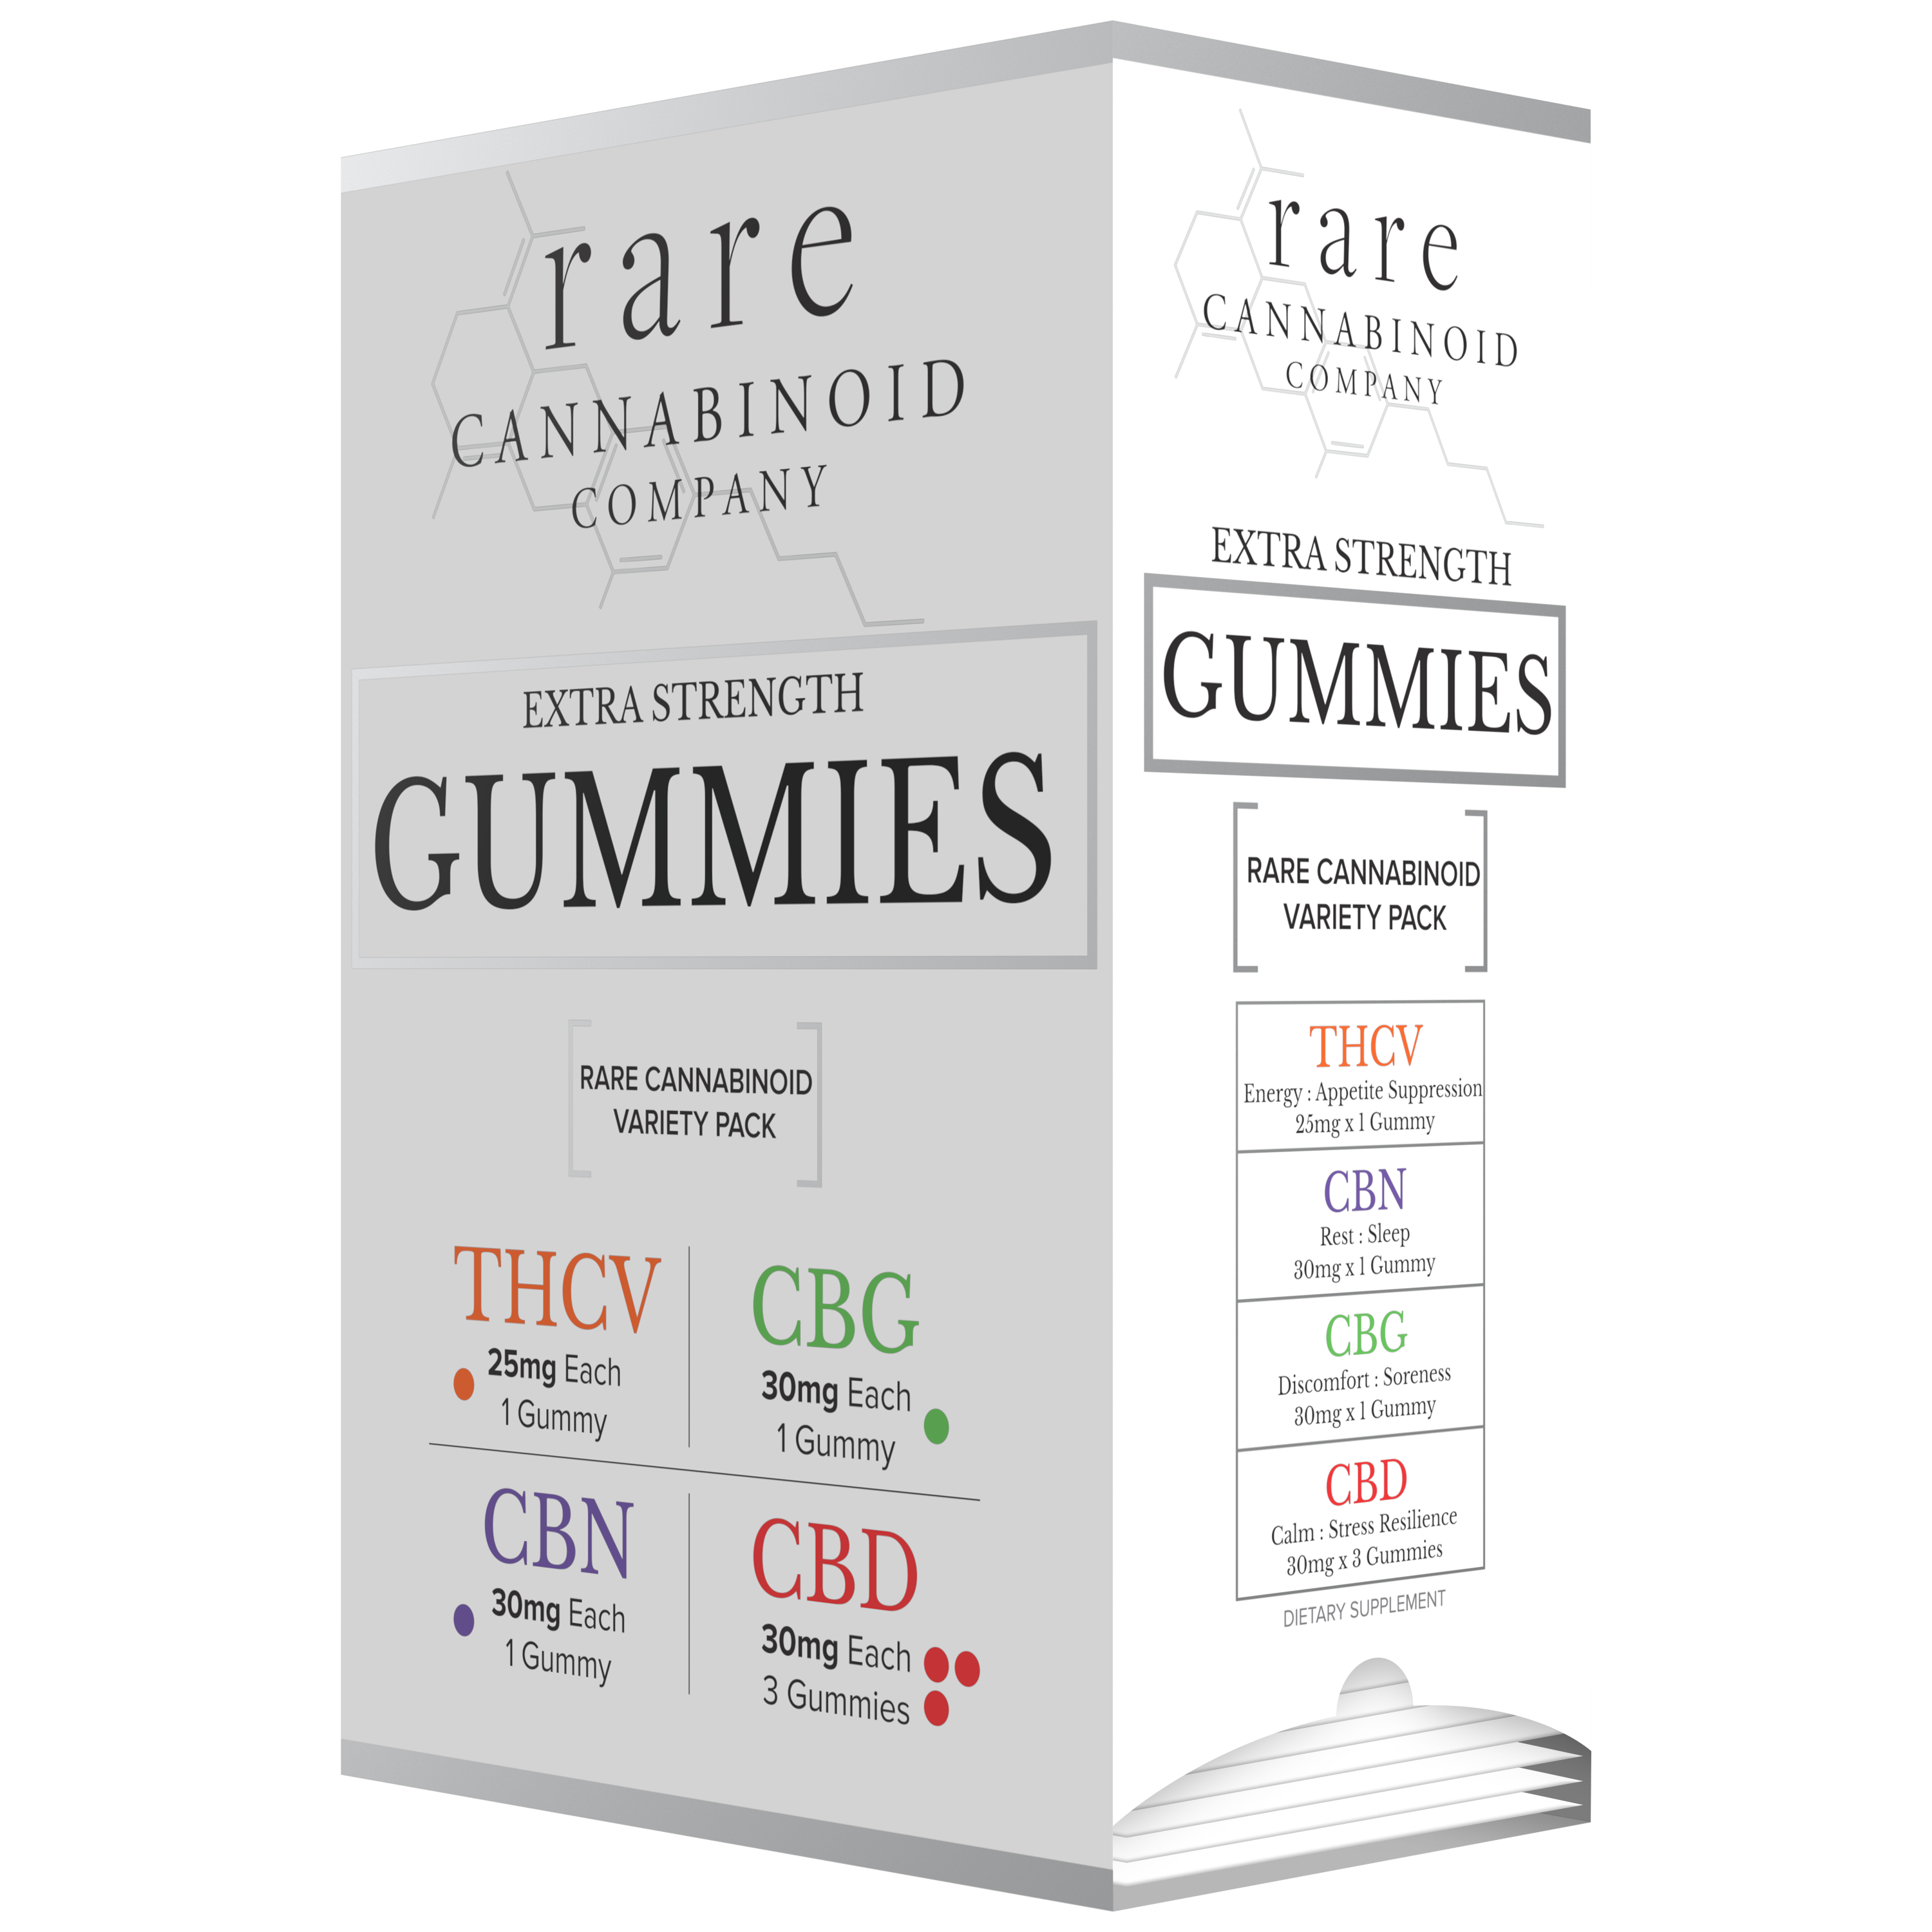 Wholesale customers will receive these dispensers to hold packets of cannabinoid gummies. The one pictured here holds the full Gummies Variety Packets of THCV, CBN, CBG, and CBD gummies.